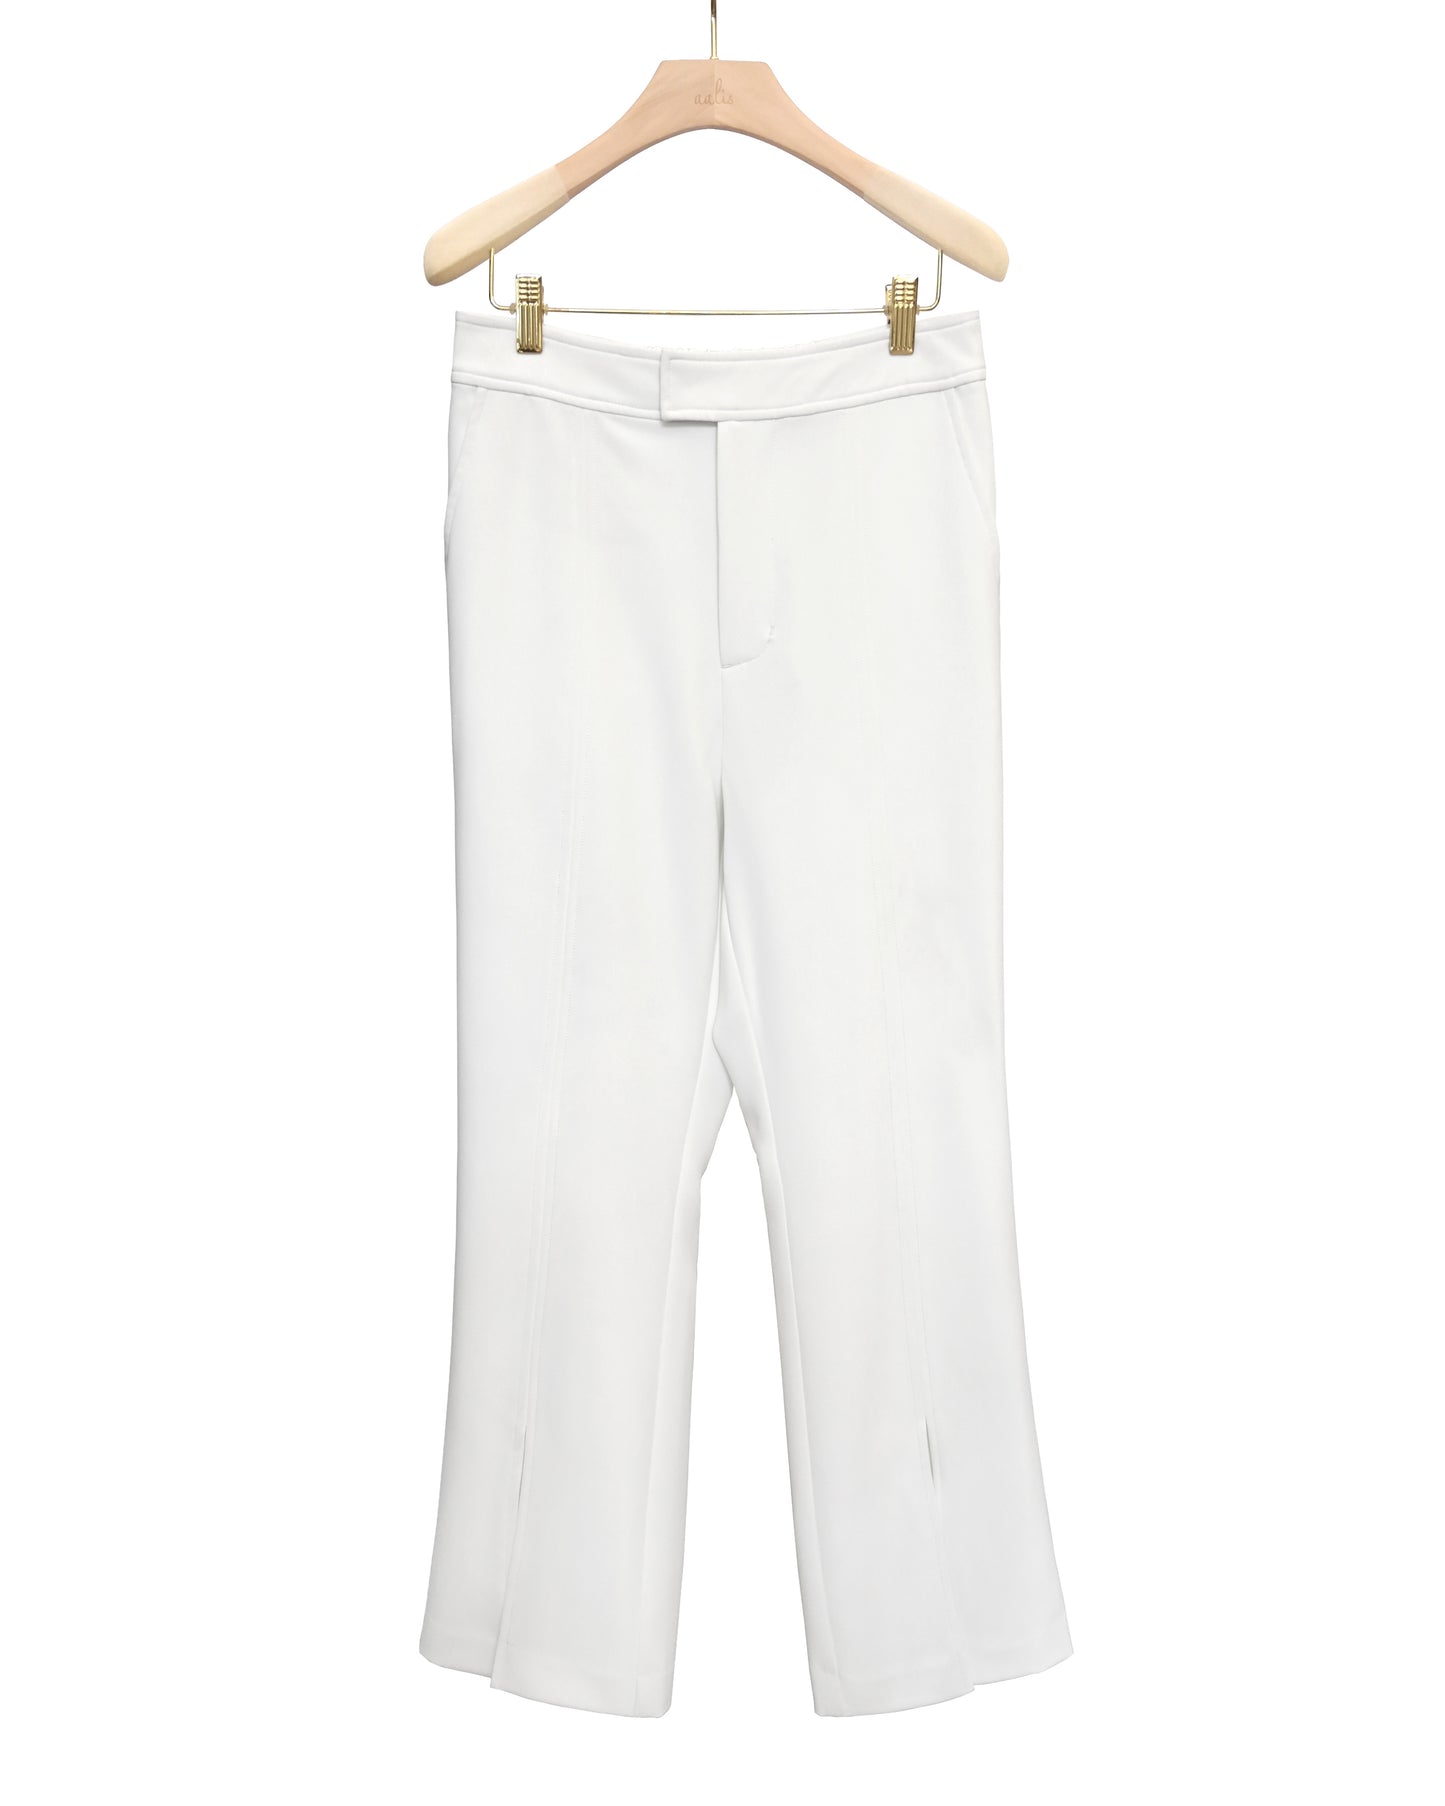 aalis PEMA front slit suiting pants (White)